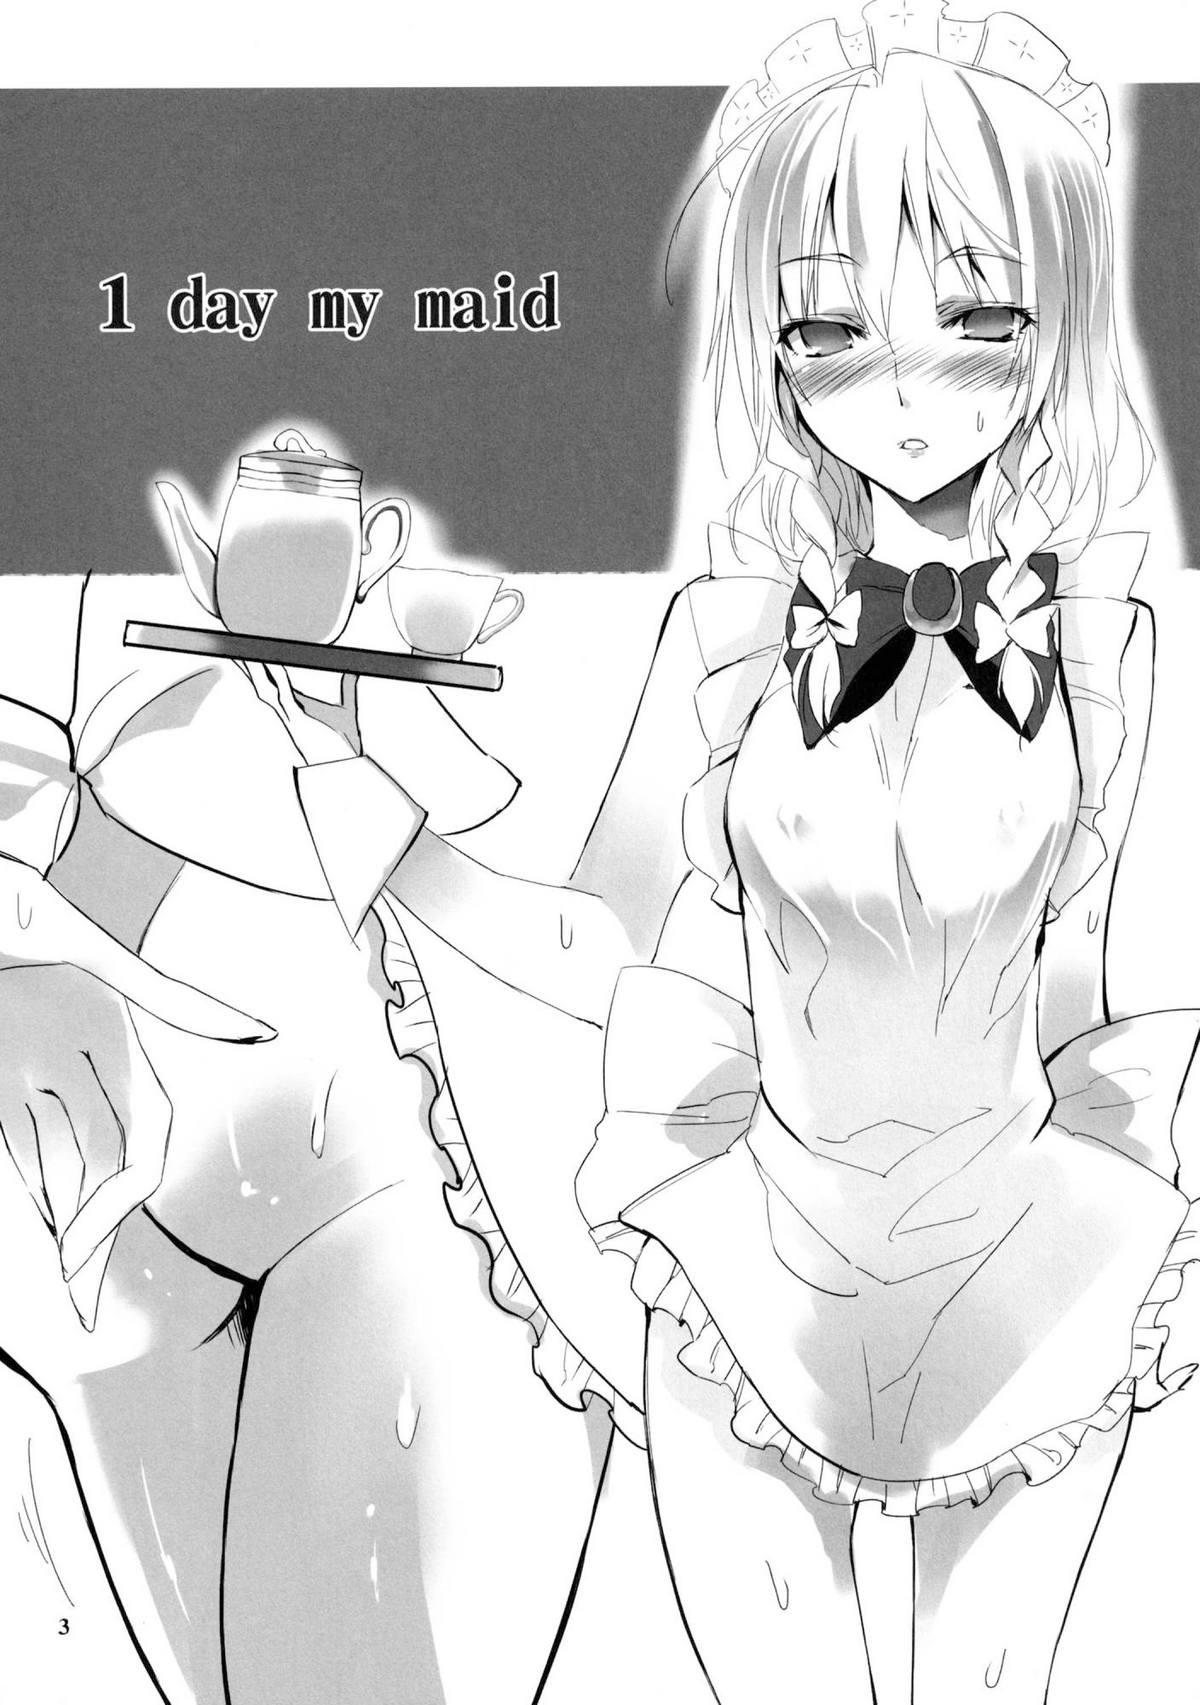 Satin 1 day my maid - Touhou project Fresh - Page 3